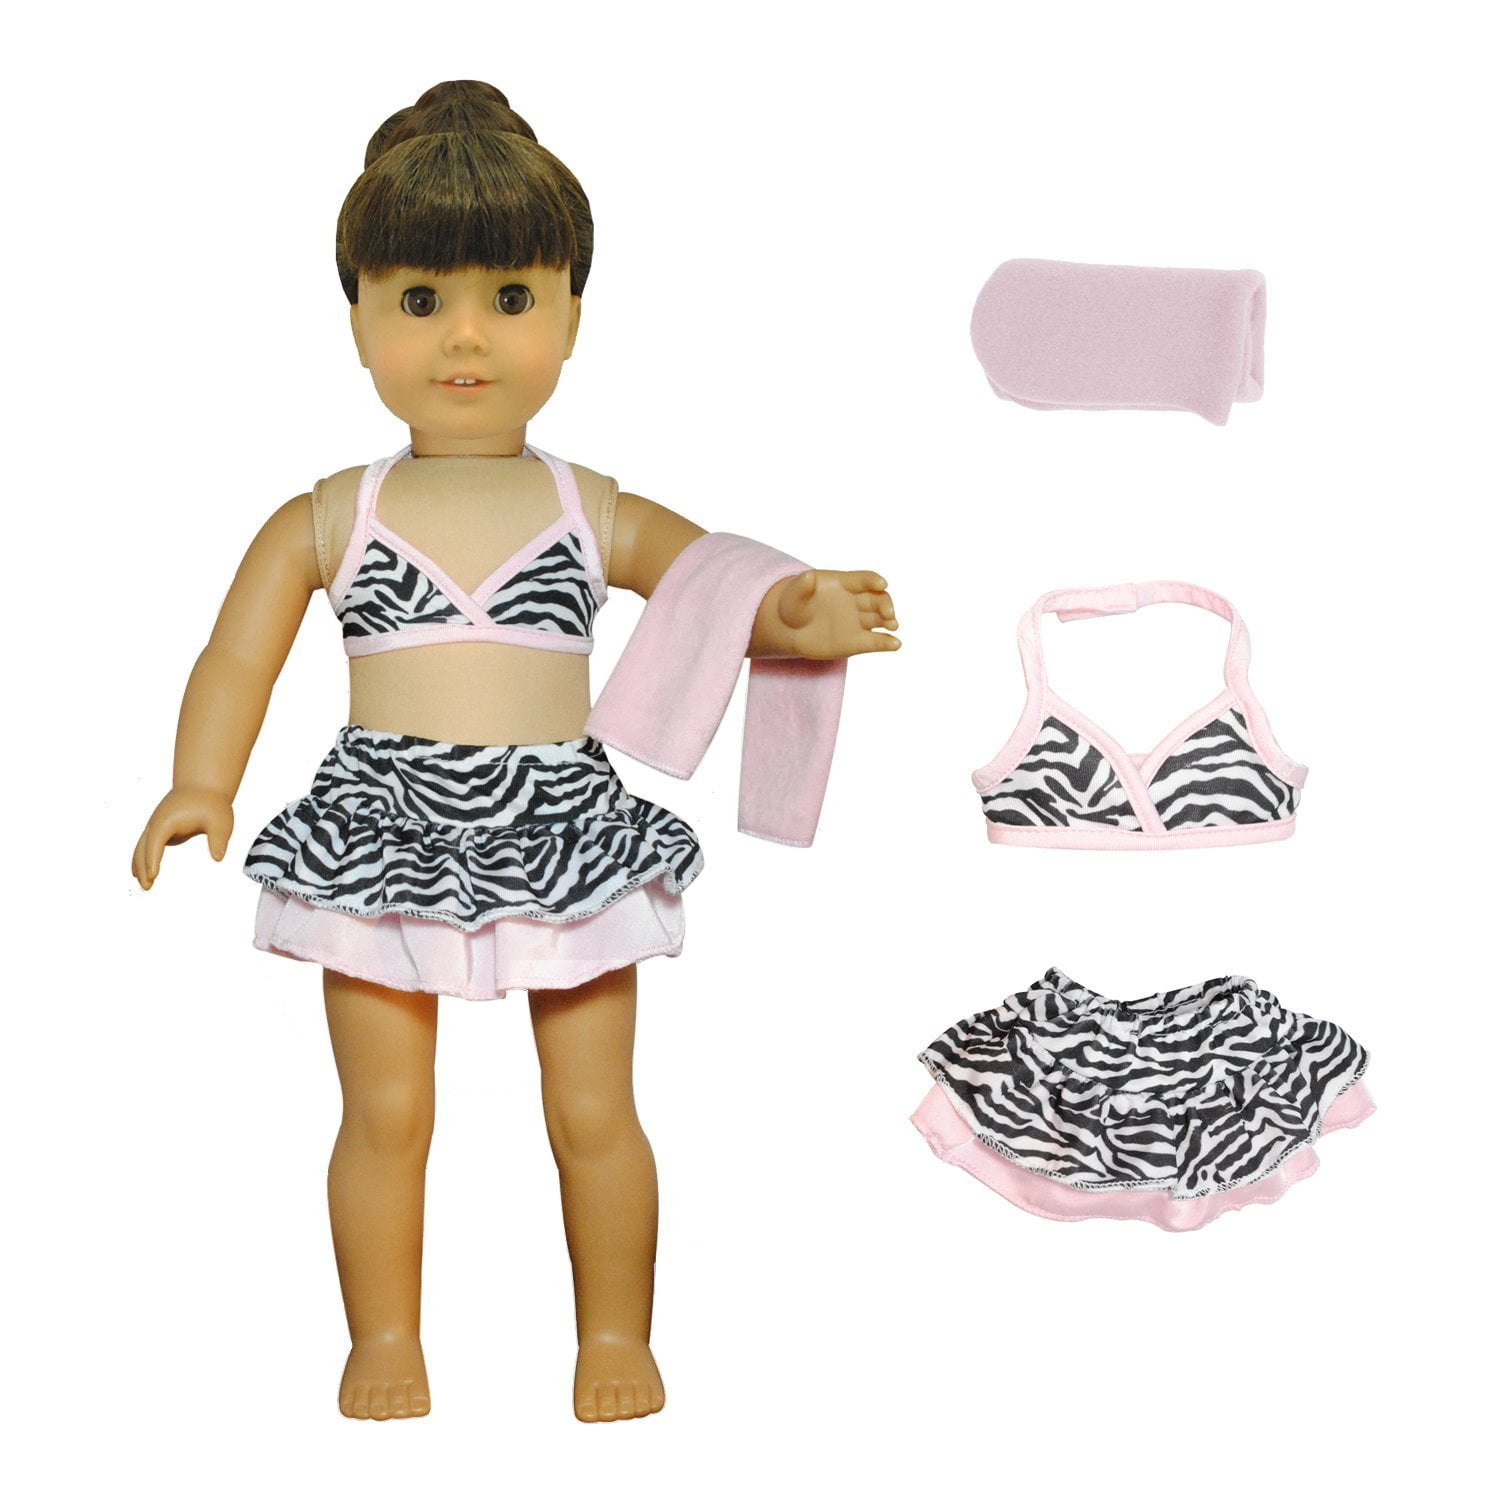 Doll Clothes 18/" Bathing Suit Navy White One-piece Fits American Girl Dolls